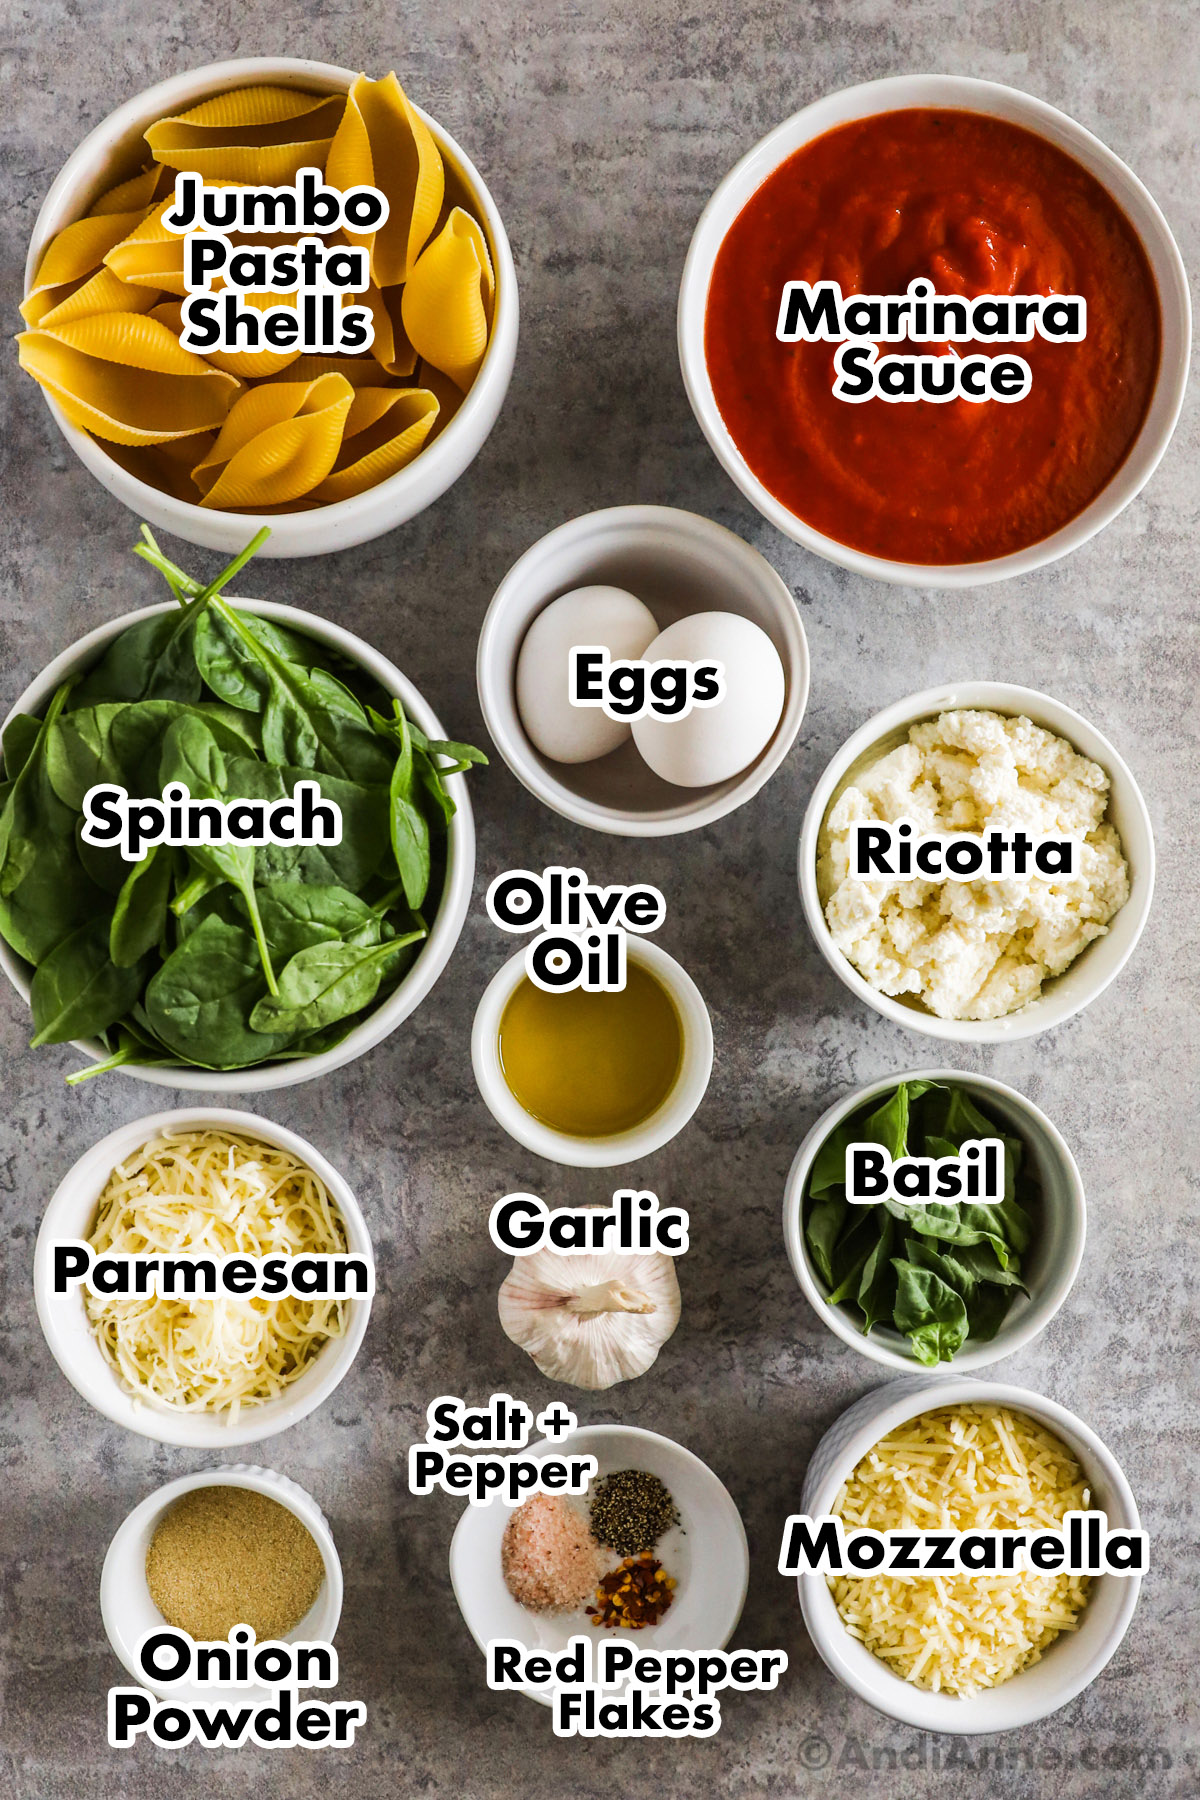 Recipe ingredients including bowls of spinach, jumbo pasta shells, marinara sauce, eggs, ricotta, olive oil, parmesan, basil, mozzarella, and spices.